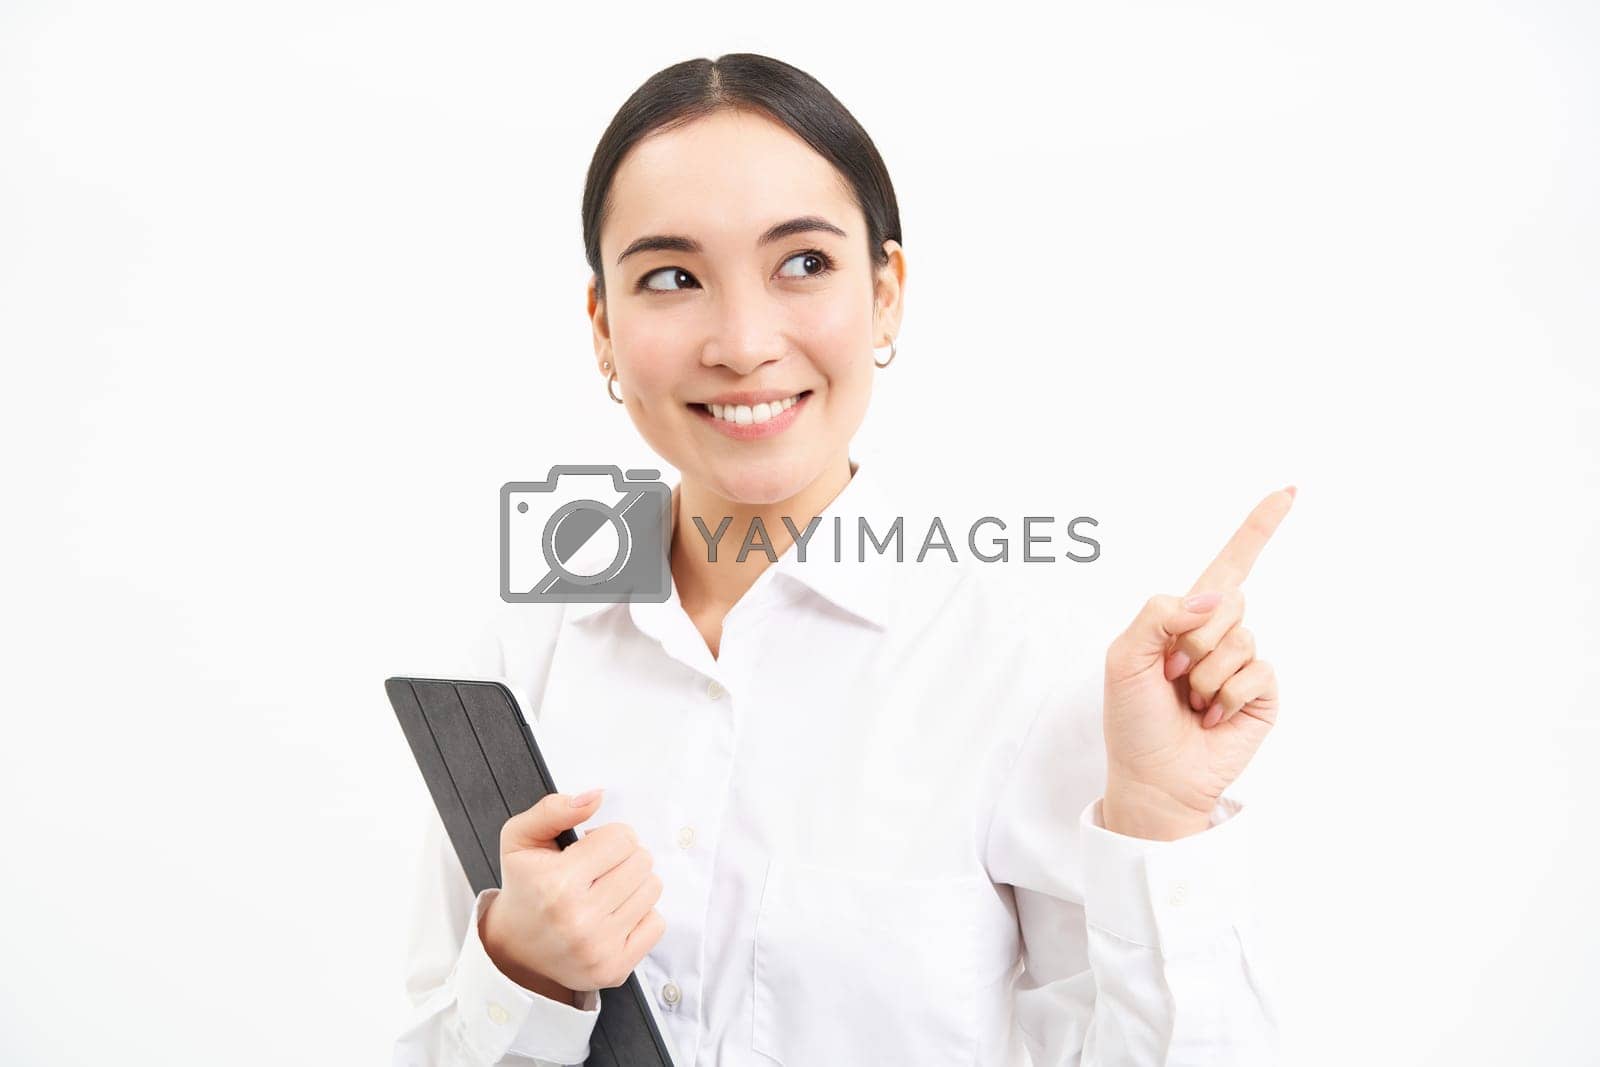 Royalty free image of Image of young professional woman, pointing finger right, holding digital tablet, showing advertisement campaign, isolated on white background by Benzoix